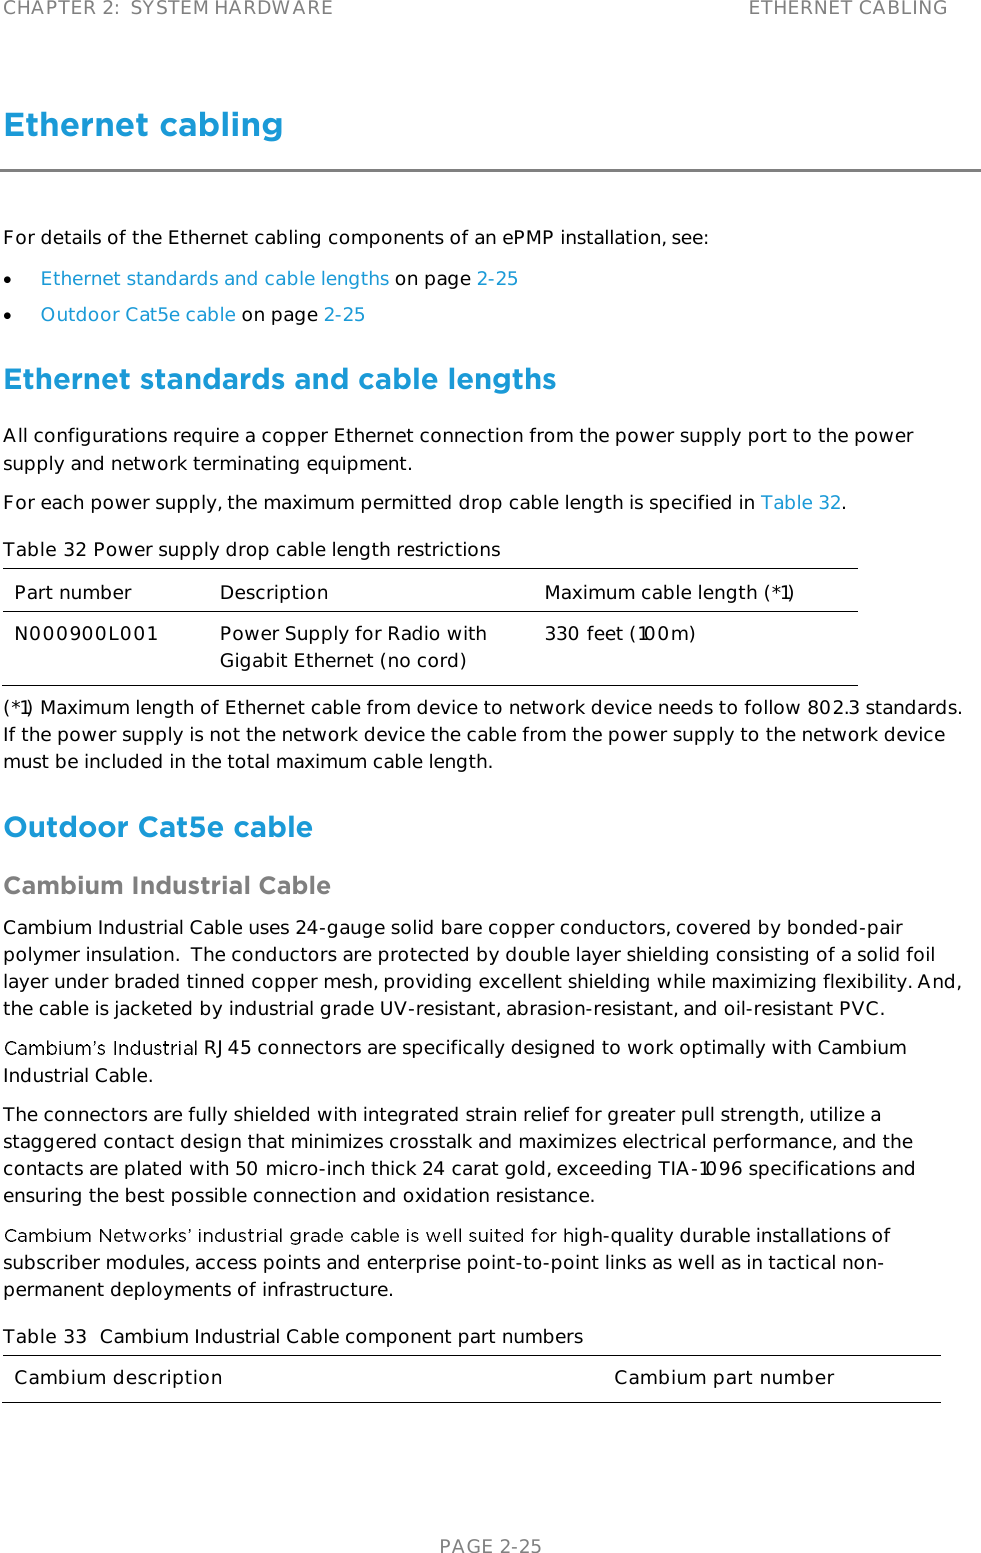 CHAPTER 2:  SYSTEM HARDWARE ETHERNET CABLING   PAGE 2-25 Ethernet cabling For details of the Ethernet cabling components of an ePMP installation, see:  Ethernet standards and cable lengths on page 2-25  Outdoor Cat5e cable on page 2-25 Ethernet standards and cable lengths All configurations require a copper Ethernet connection from the power supply port to the power supply and network terminating equipment.  For each power supply, the maximum permitted drop cable length is specified in Table 32. Table 32 Power supply drop cable length restrictions Part number Description Maximum cable length (*1) N000900L001 Power Supply for Radio with Gigabit Ethernet (no cord) 330 feet (100m) (*1) Maximum length of Ethernet cable from device to network device needs to follow 802.3 standards.  If the power supply is not the network device the cable from the power supply to the network device must be included in the total maximum cable length. Outdoor Cat5e cable Cambium Industrial Cable Cambium Industrial Cable uses 24-gauge solid bare copper conductors, covered by bonded-pair polymer insulation.  The conductors are protected by double layer shielding consisting of a solid foil layer under braded tinned copper mesh, providing excellent shielding while maximizing flexibility. And, the cable is jacketed by industrial grade UV-resistant, abrasion-resistant, and oil-resistant PVC. RJ45 connectors are specifically designed to work optimally with Cambium Industrial Cable.   The connectors are fully shielded with integrated strain relief for greater pull strength, utilize a staggered contact design that minimizes crosstalk and maximizes electrical performance, and the contacts are plated with 50 micro-inch thick 24 carat gold, exceeding TIA-1096 specifications and ensuring the best possible connection and oxidation resistance. igh-quality durable installations of subscriber modules, access points and enterprise point-to-point links as well as in tactical non-permanent deployments of infrastructure.   Table 33  Cambium Industrial Cable component part numbers Cambium description Cambium part number 